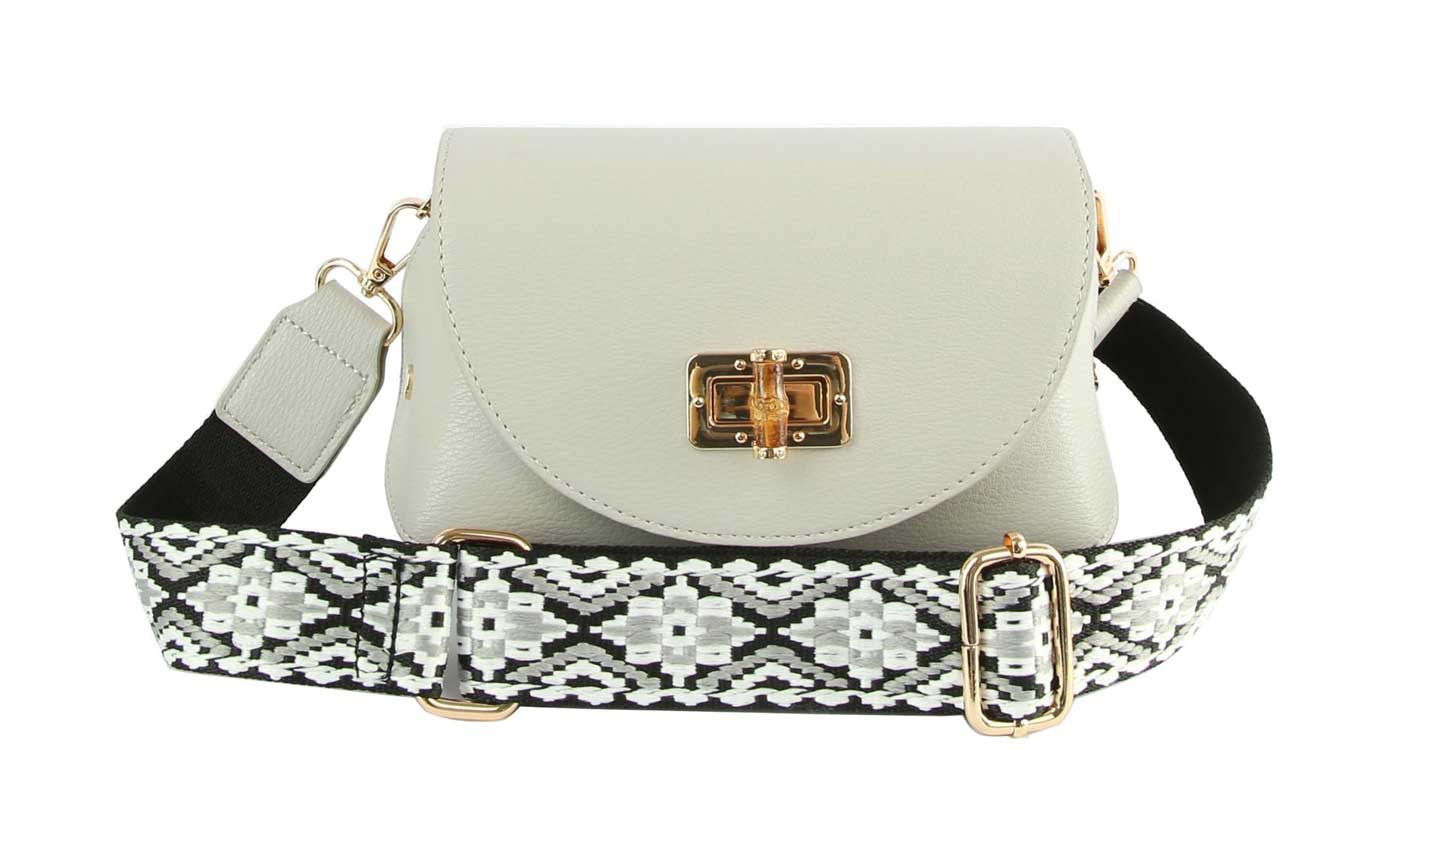 Grey PU Leather Guitar Strap Bamboo Twist Lock Flap Crossbody Bag, This gorgeous crossbody bag is going to be your absolute favorite new purchase! It features with adjustable and detachable handle strap, upper Flap with pocket. Ideal for keeping your money, bank cards, lipstick, coins, and other small essentials in one place. It's versatile enough to carry with different outfits throughout the week. It's perfectly lightweight to carry around all day with all handy items altogether.